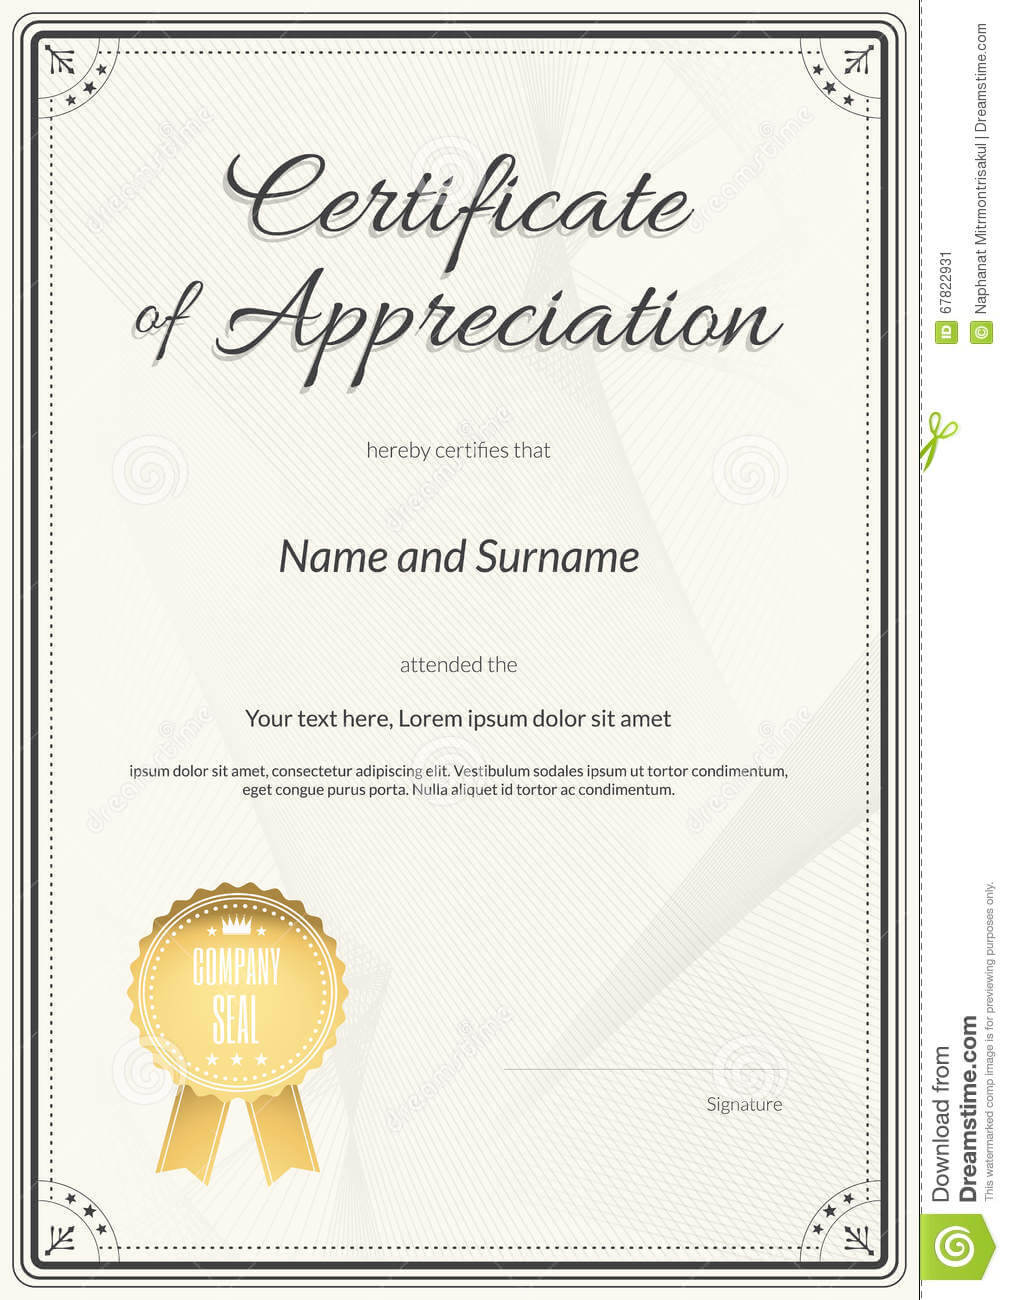 Certificate Of Appreciation Template In Vector Stock Vector Throughout Certificate Of Excellence Template Free Download